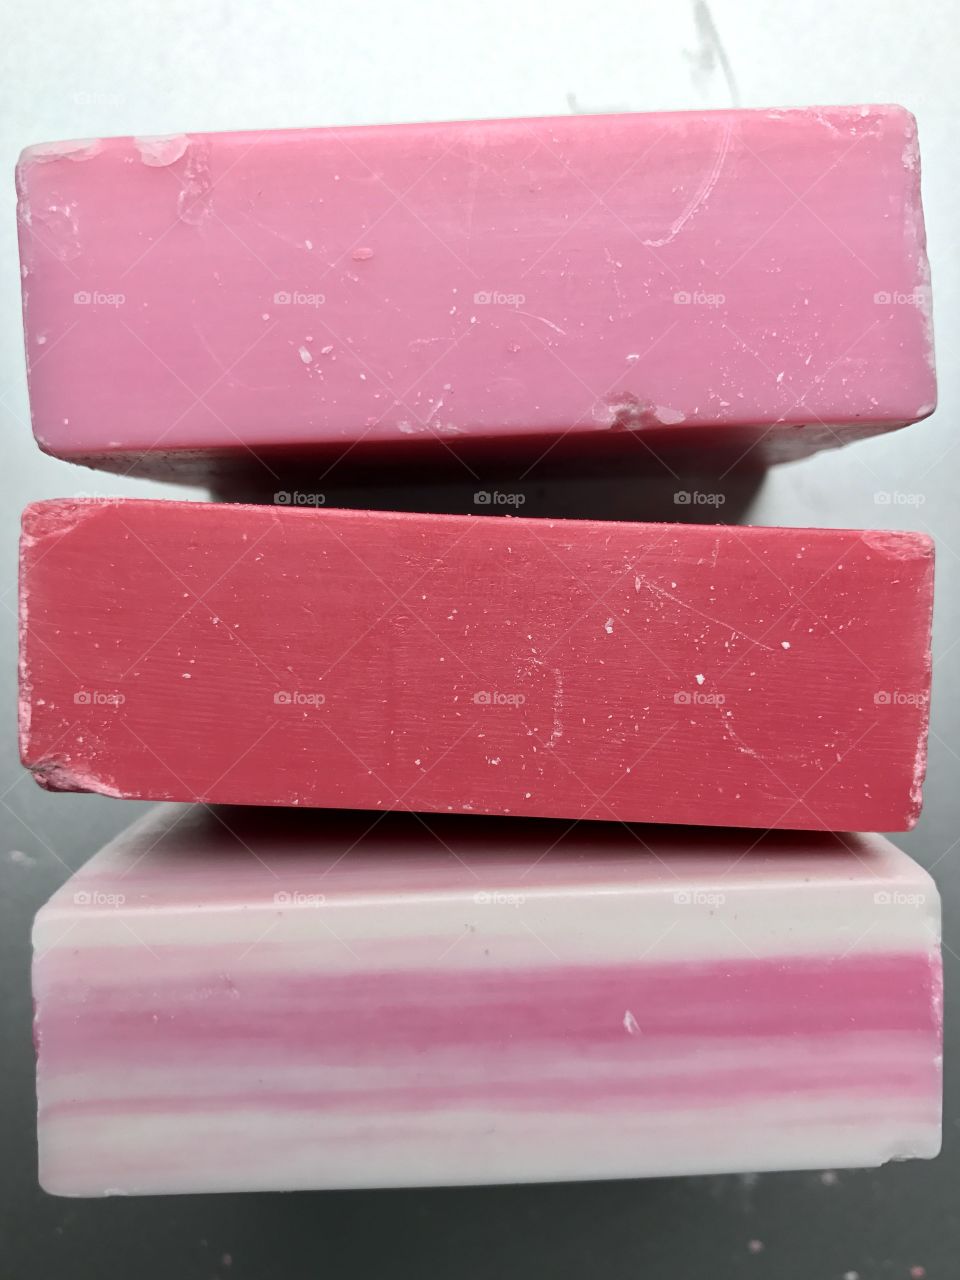 Pink soap stack